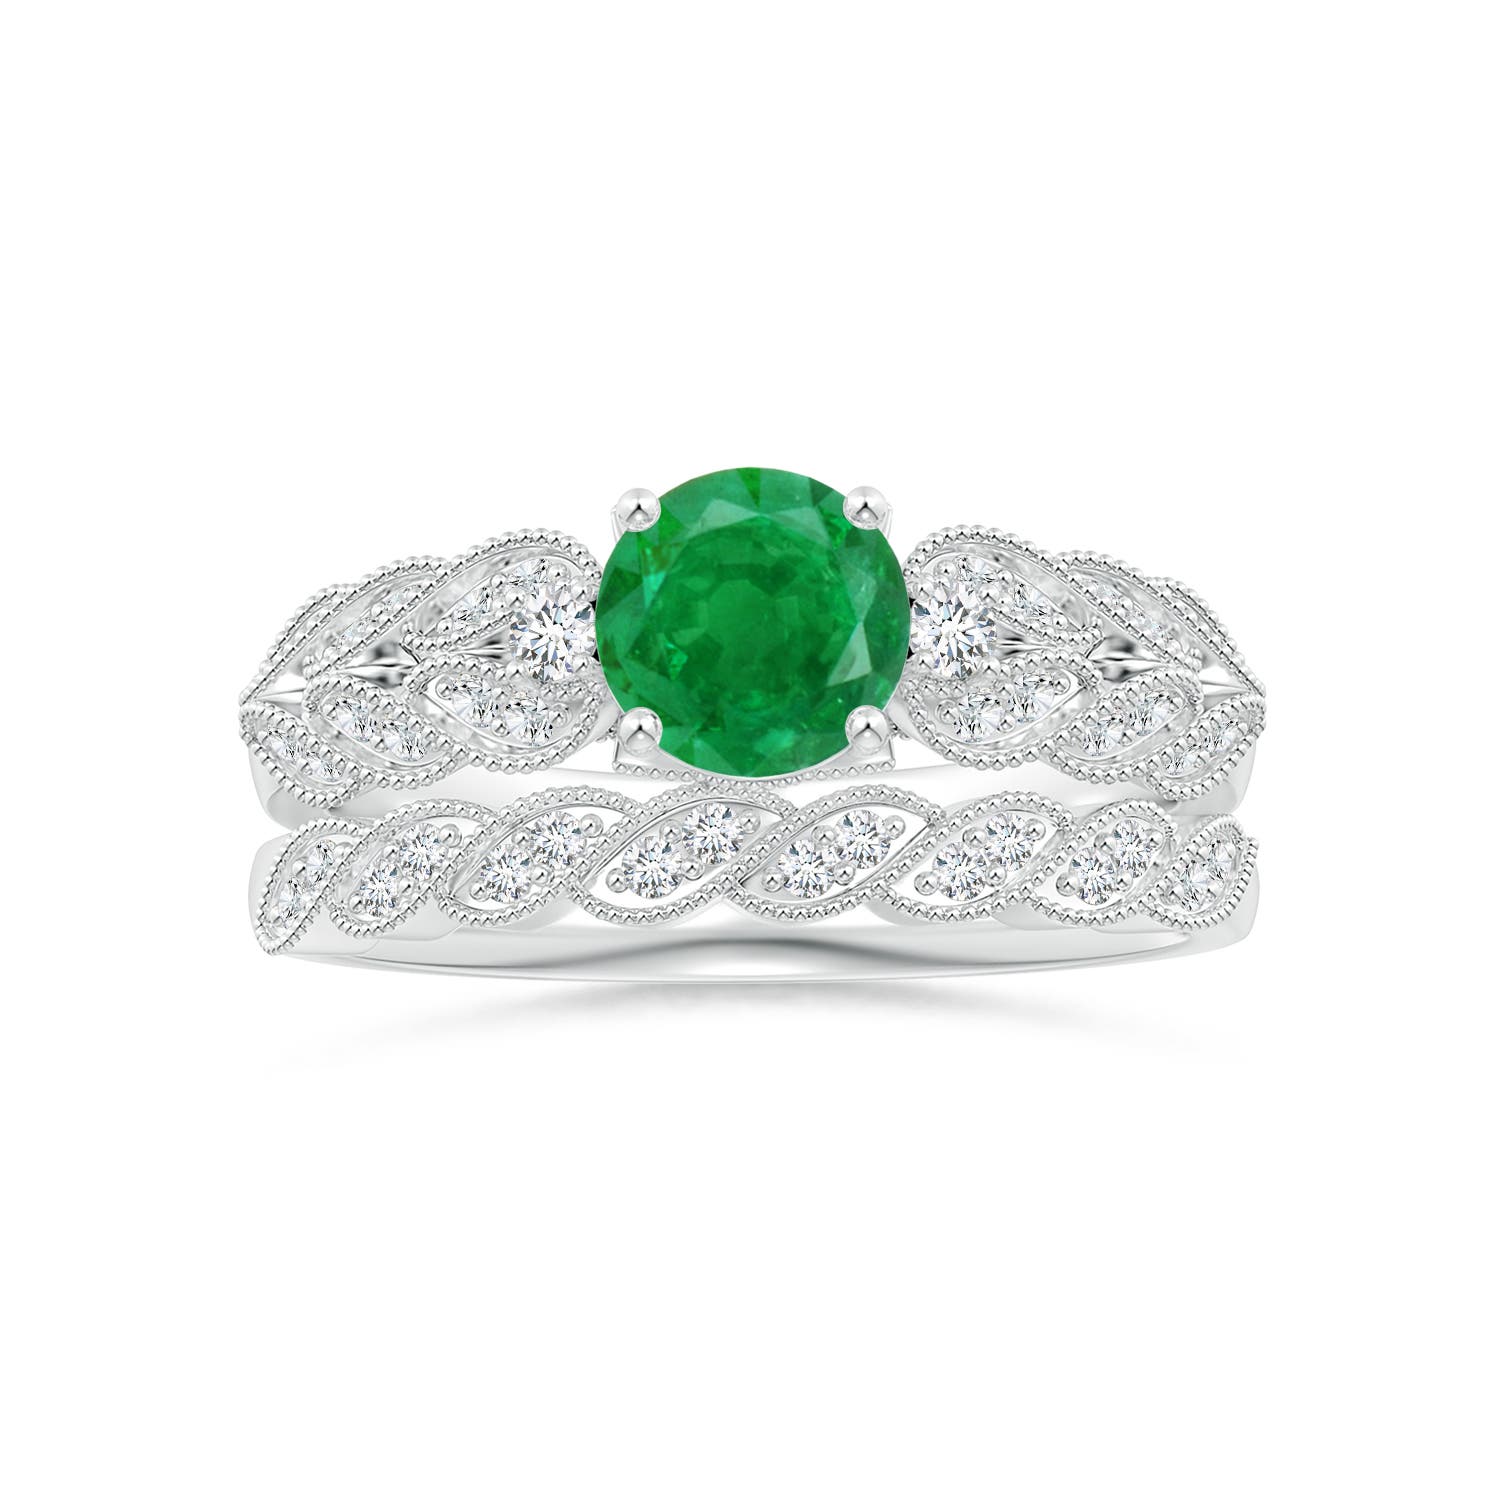 AA - Emerald / 0.94 CT / 14 KT White Gold